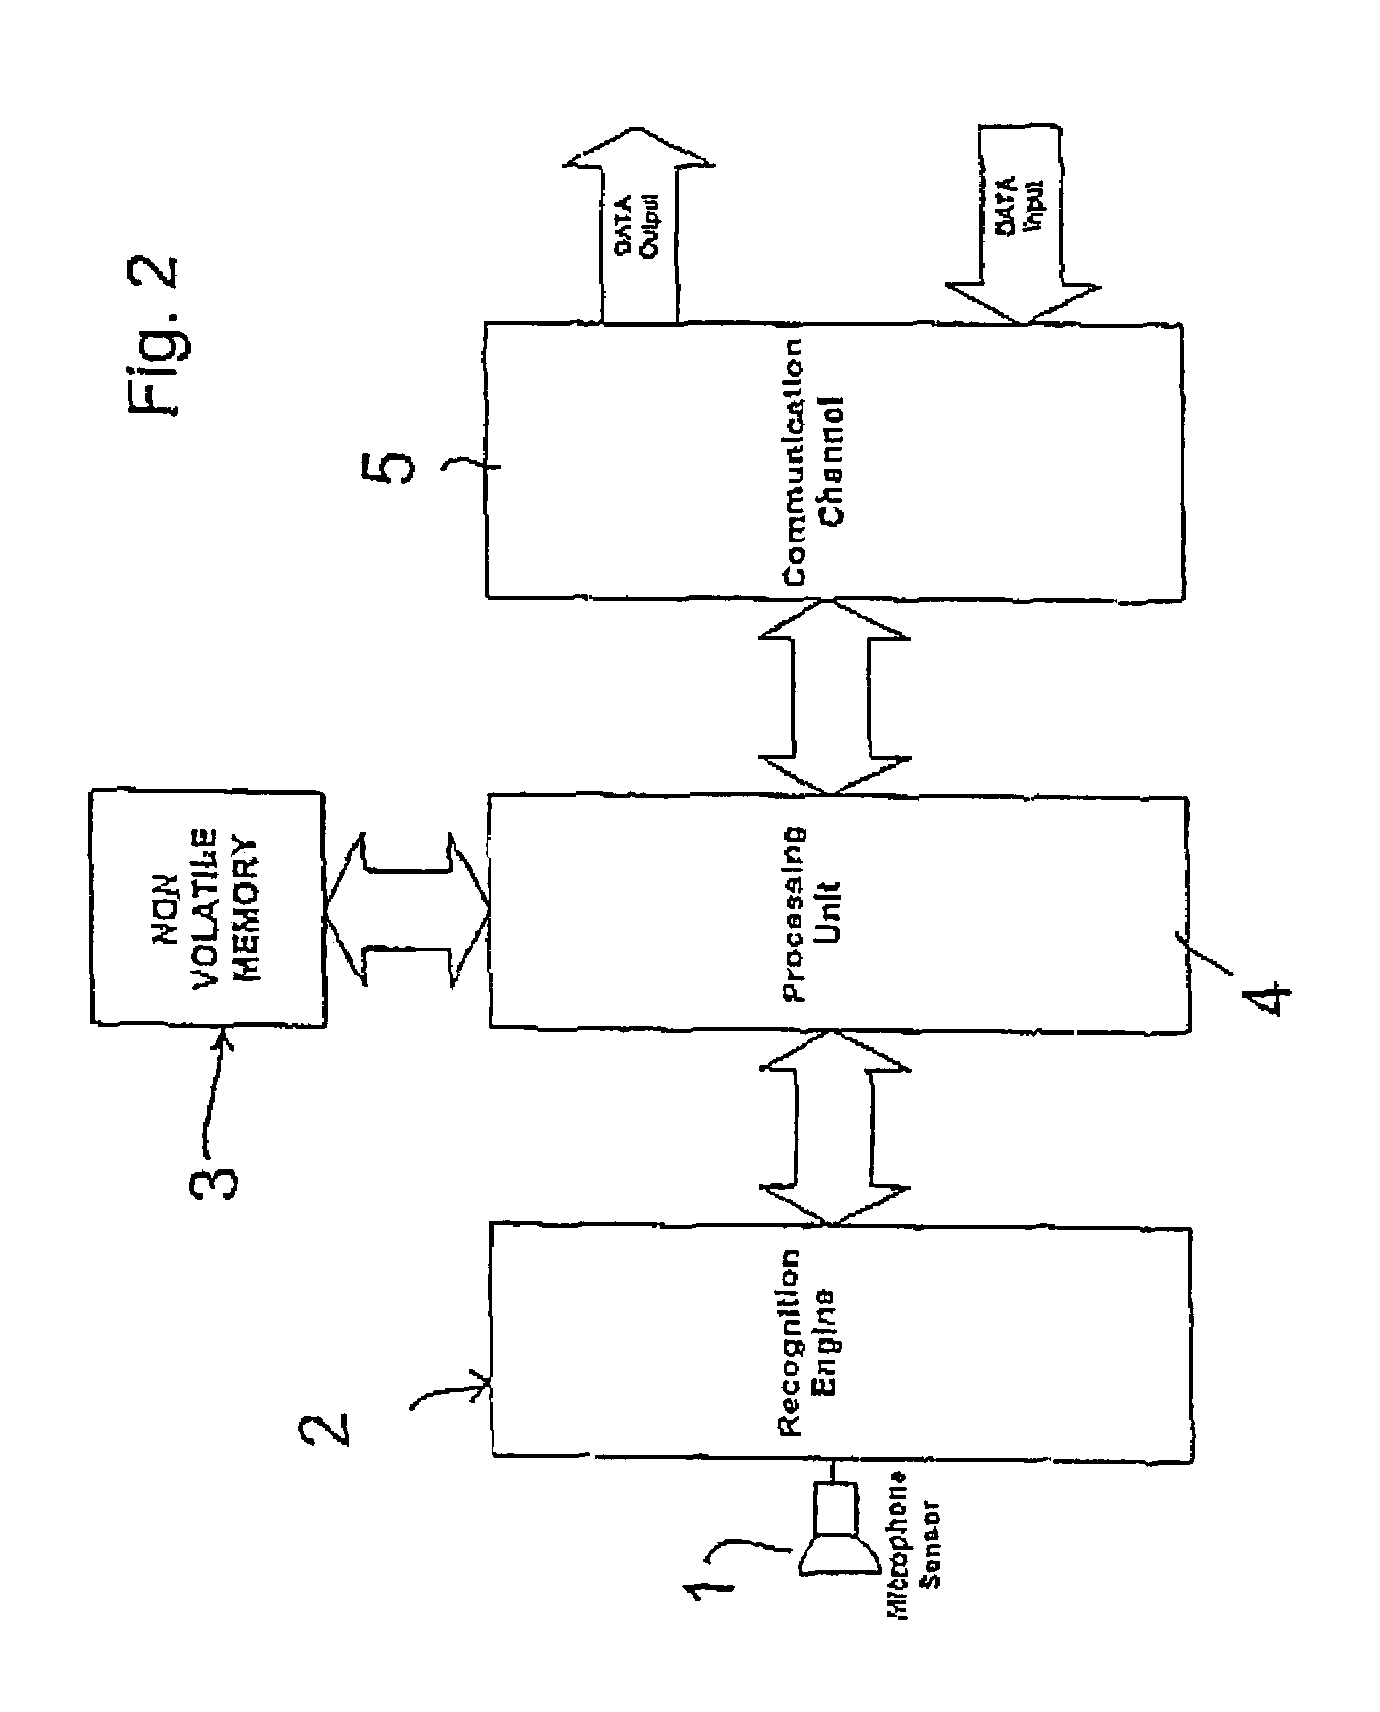 Diagnostic tool for an energy conversion appliance